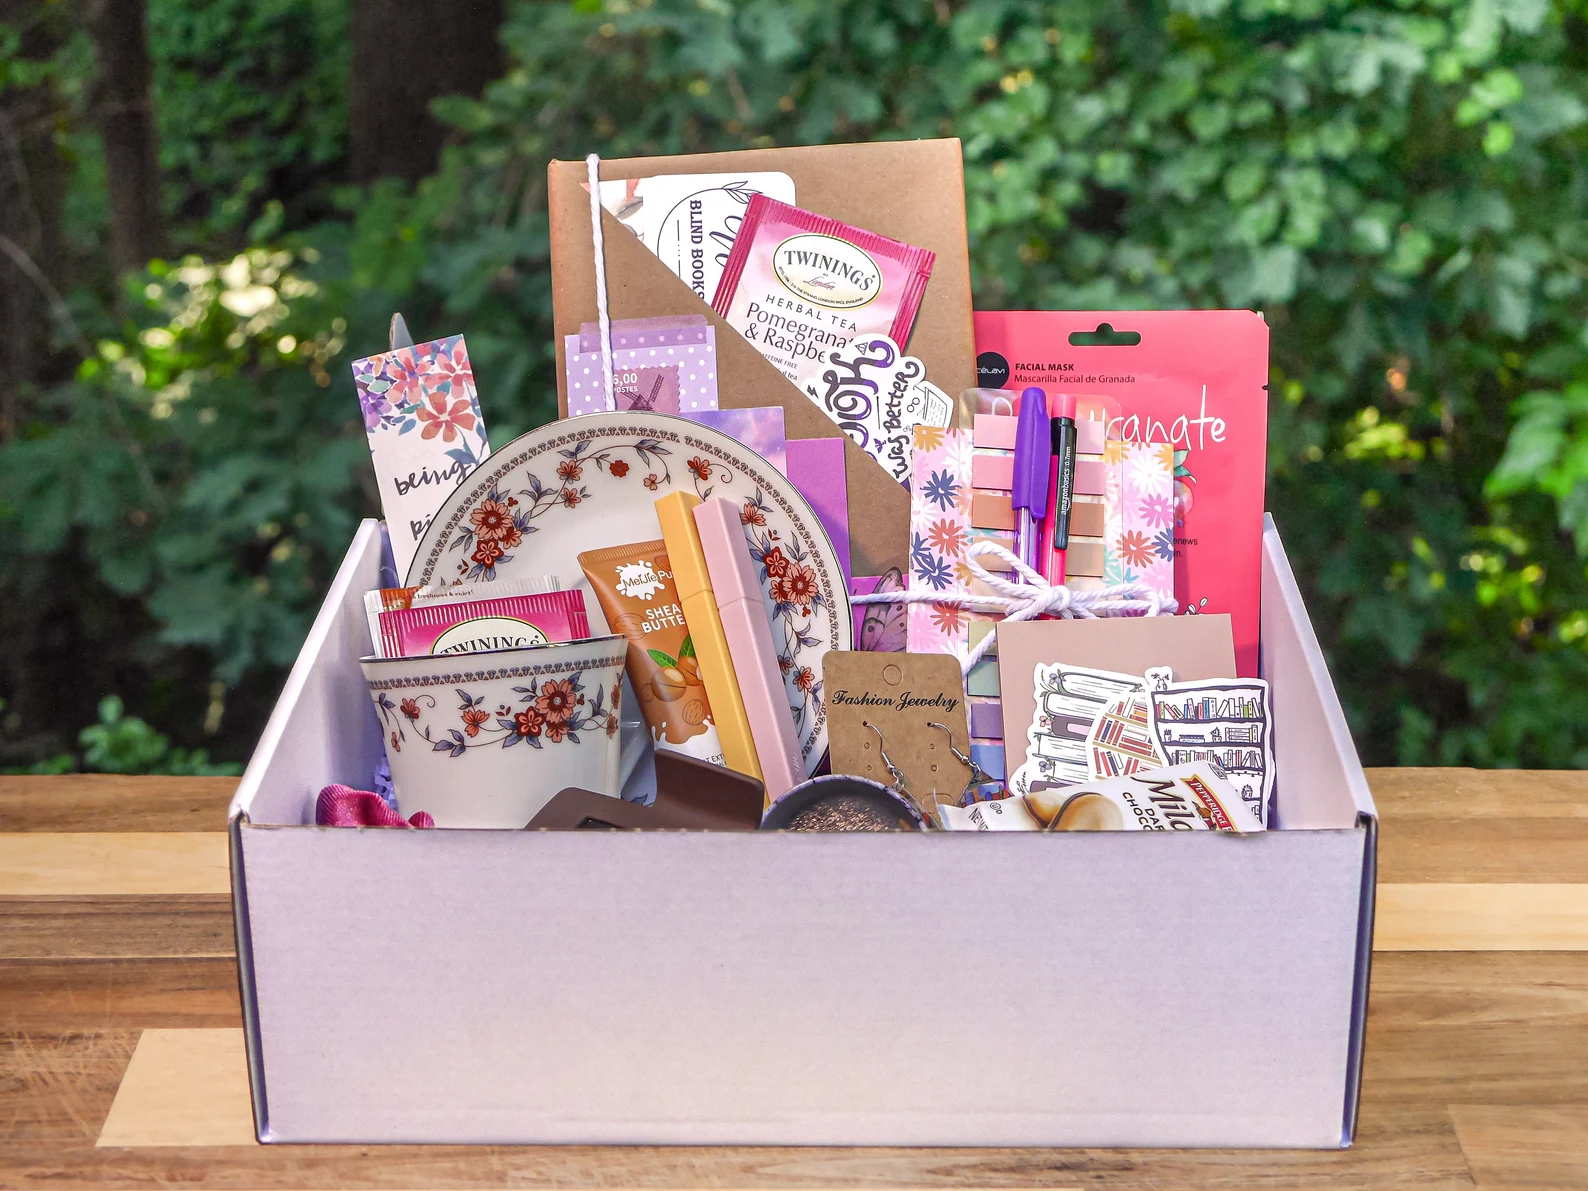 blind date with a book box set with a teacup and other bookish goodies